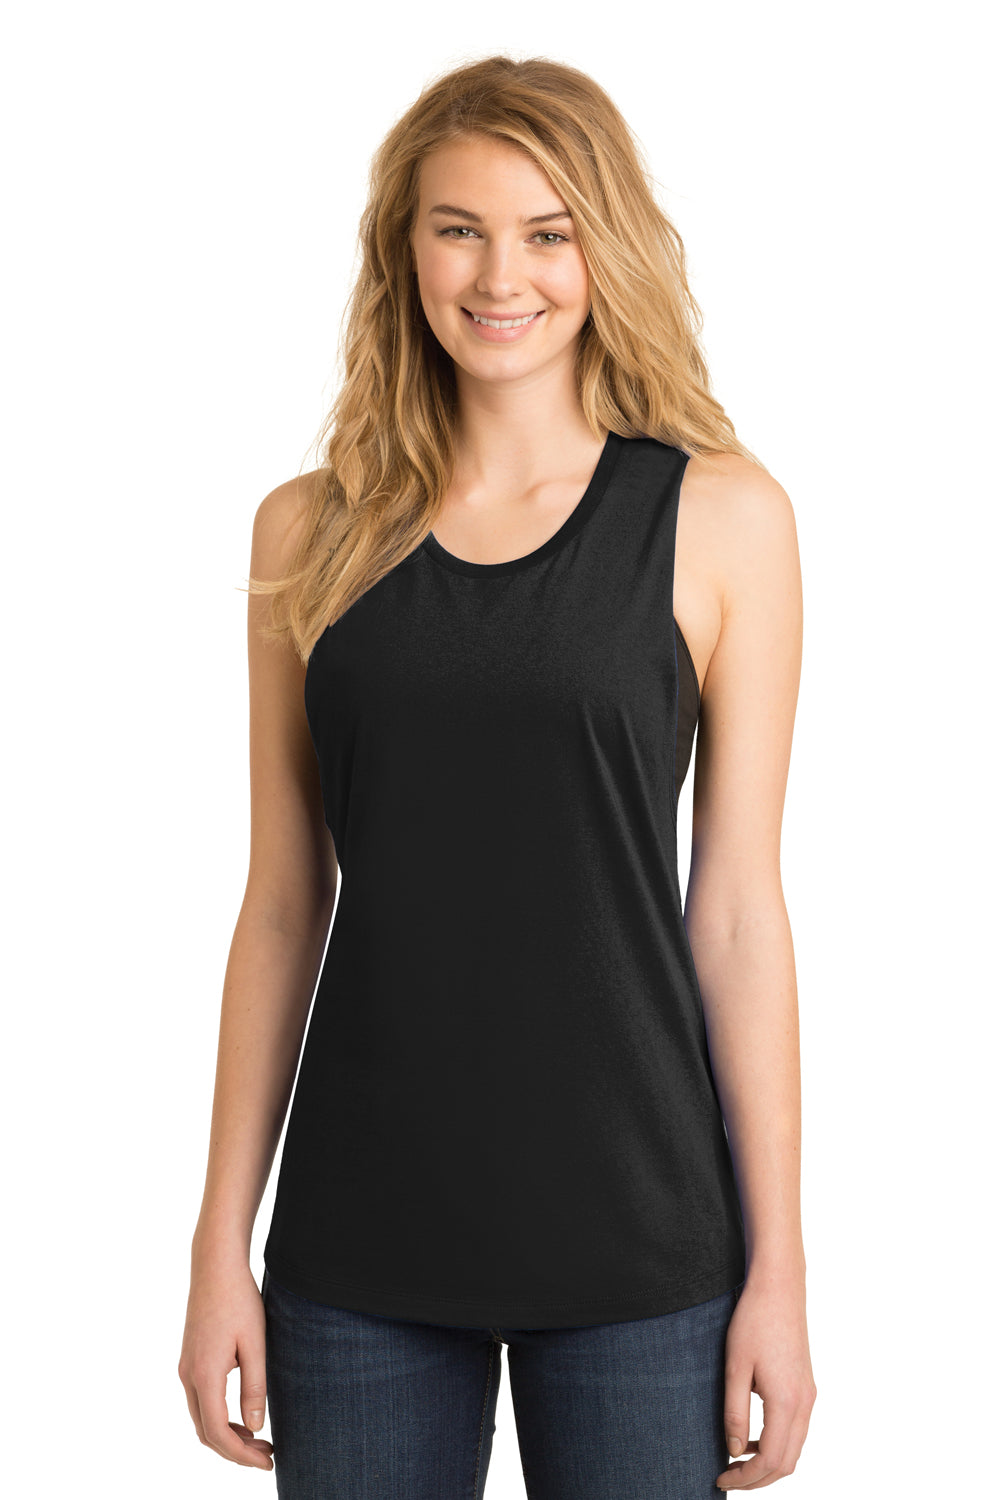 District DT6301 Womens Very Important Festival Tank Top Black Front